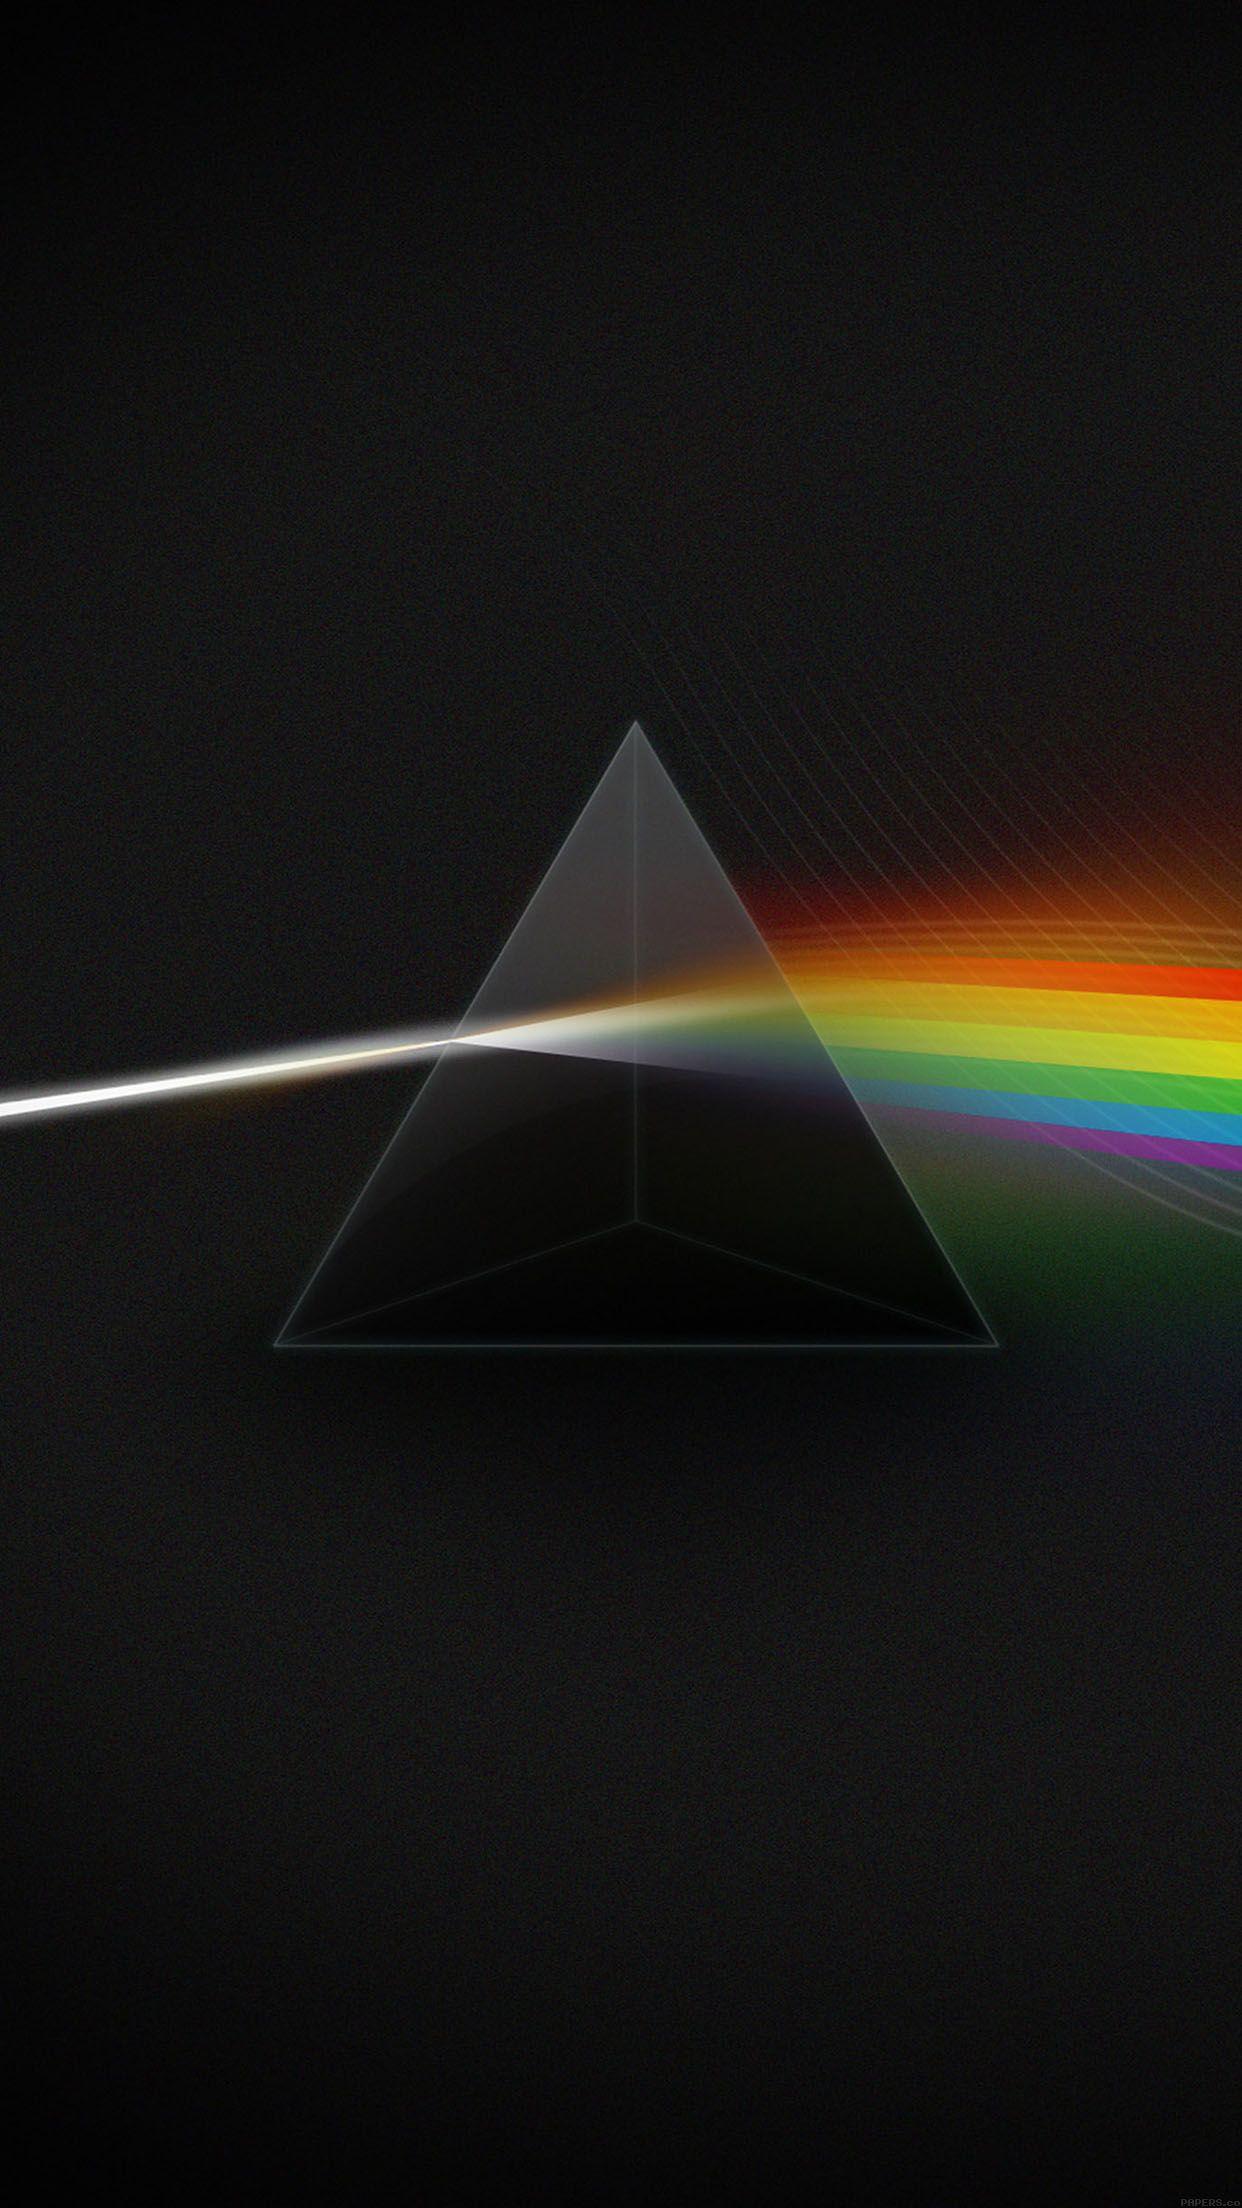 I Love Papers. pink floyd dark side of the moon music art